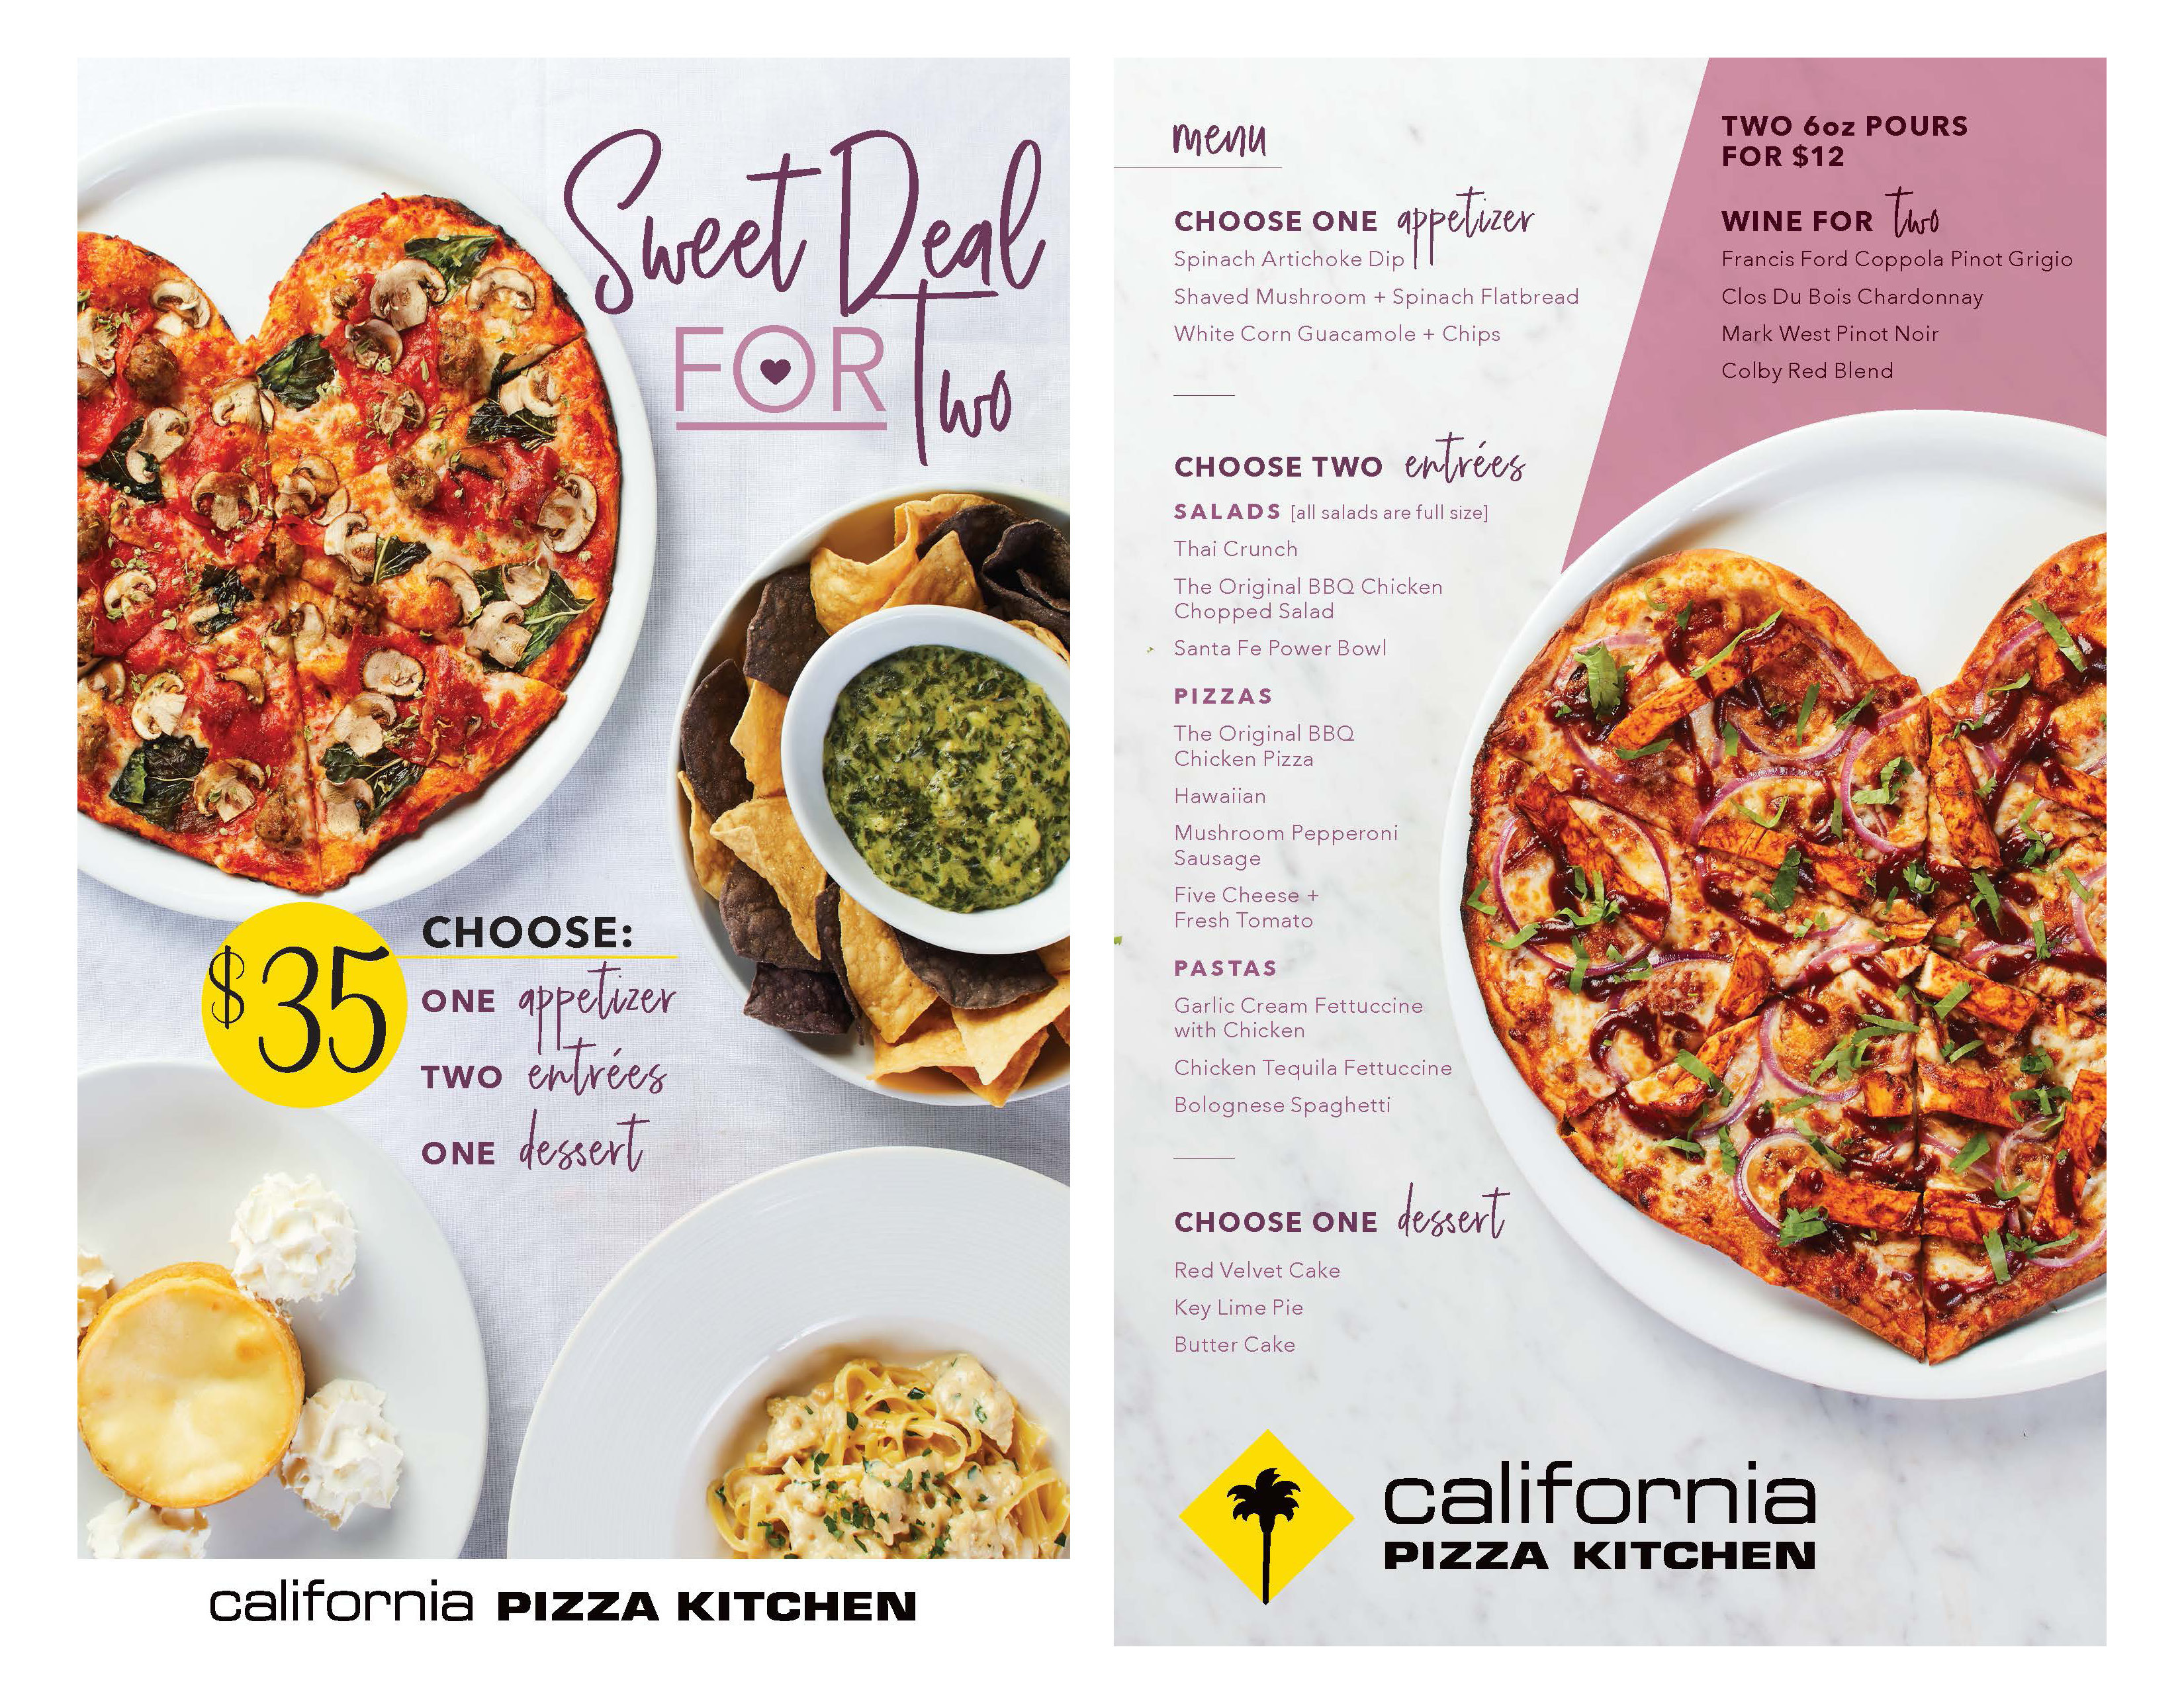 California Pizza Kitchen Dishes Out The Love This Valentines Day With Heart Shaped Pizzas